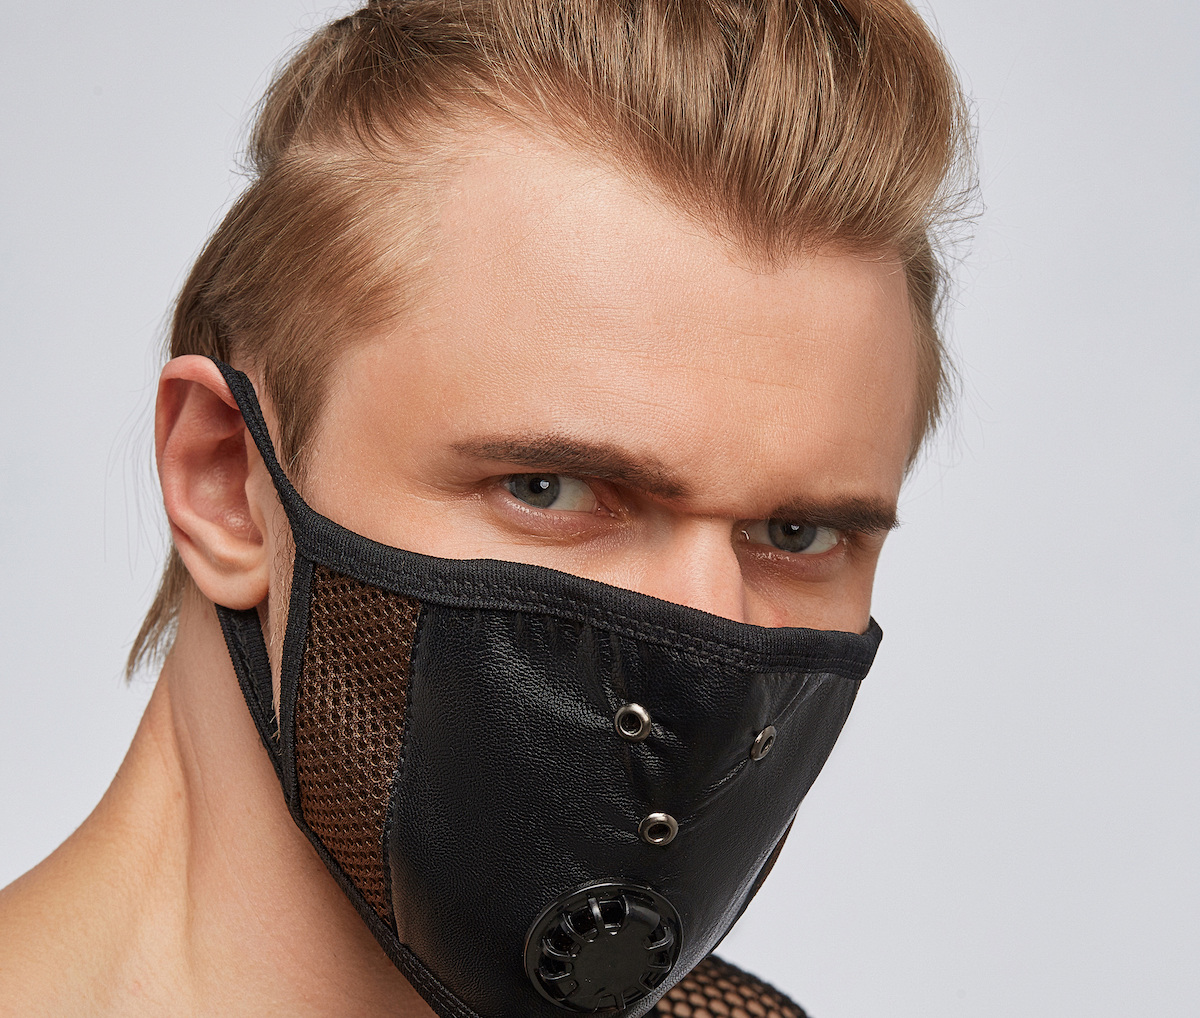 Close-up portrait of a blond man, wearing a black leather mask with brown mesh under it and ventilation openings.